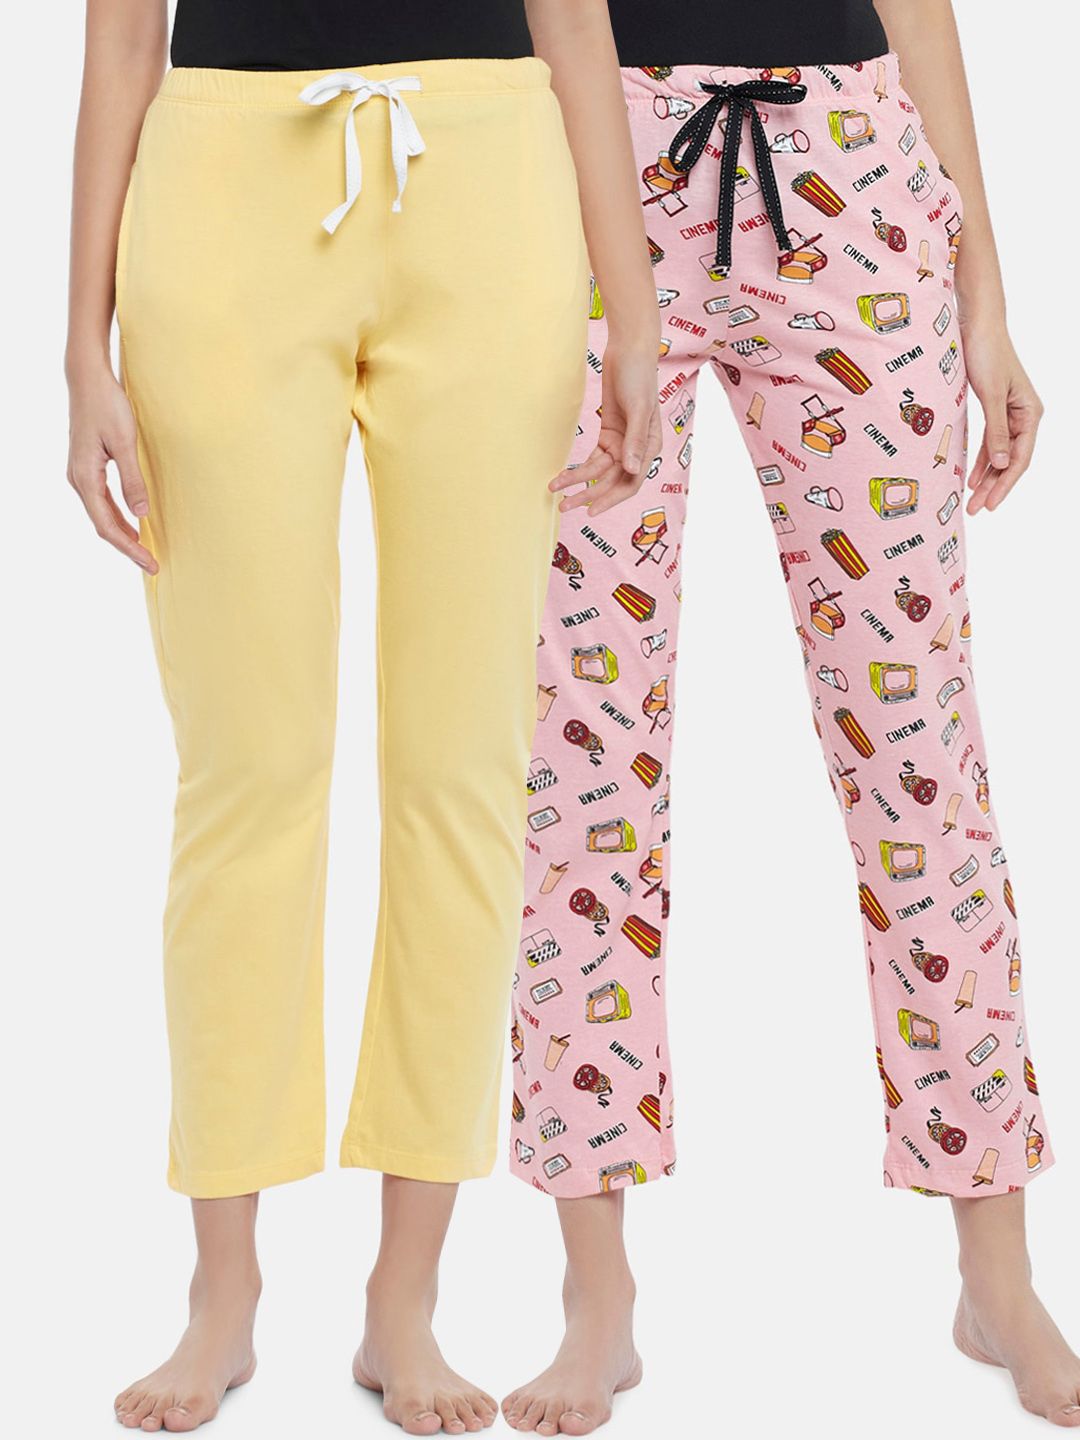 Dreamz by Pantaloons Women Set of 2 Yellow & Pink Printed Cotton Lounge Pants Price in India